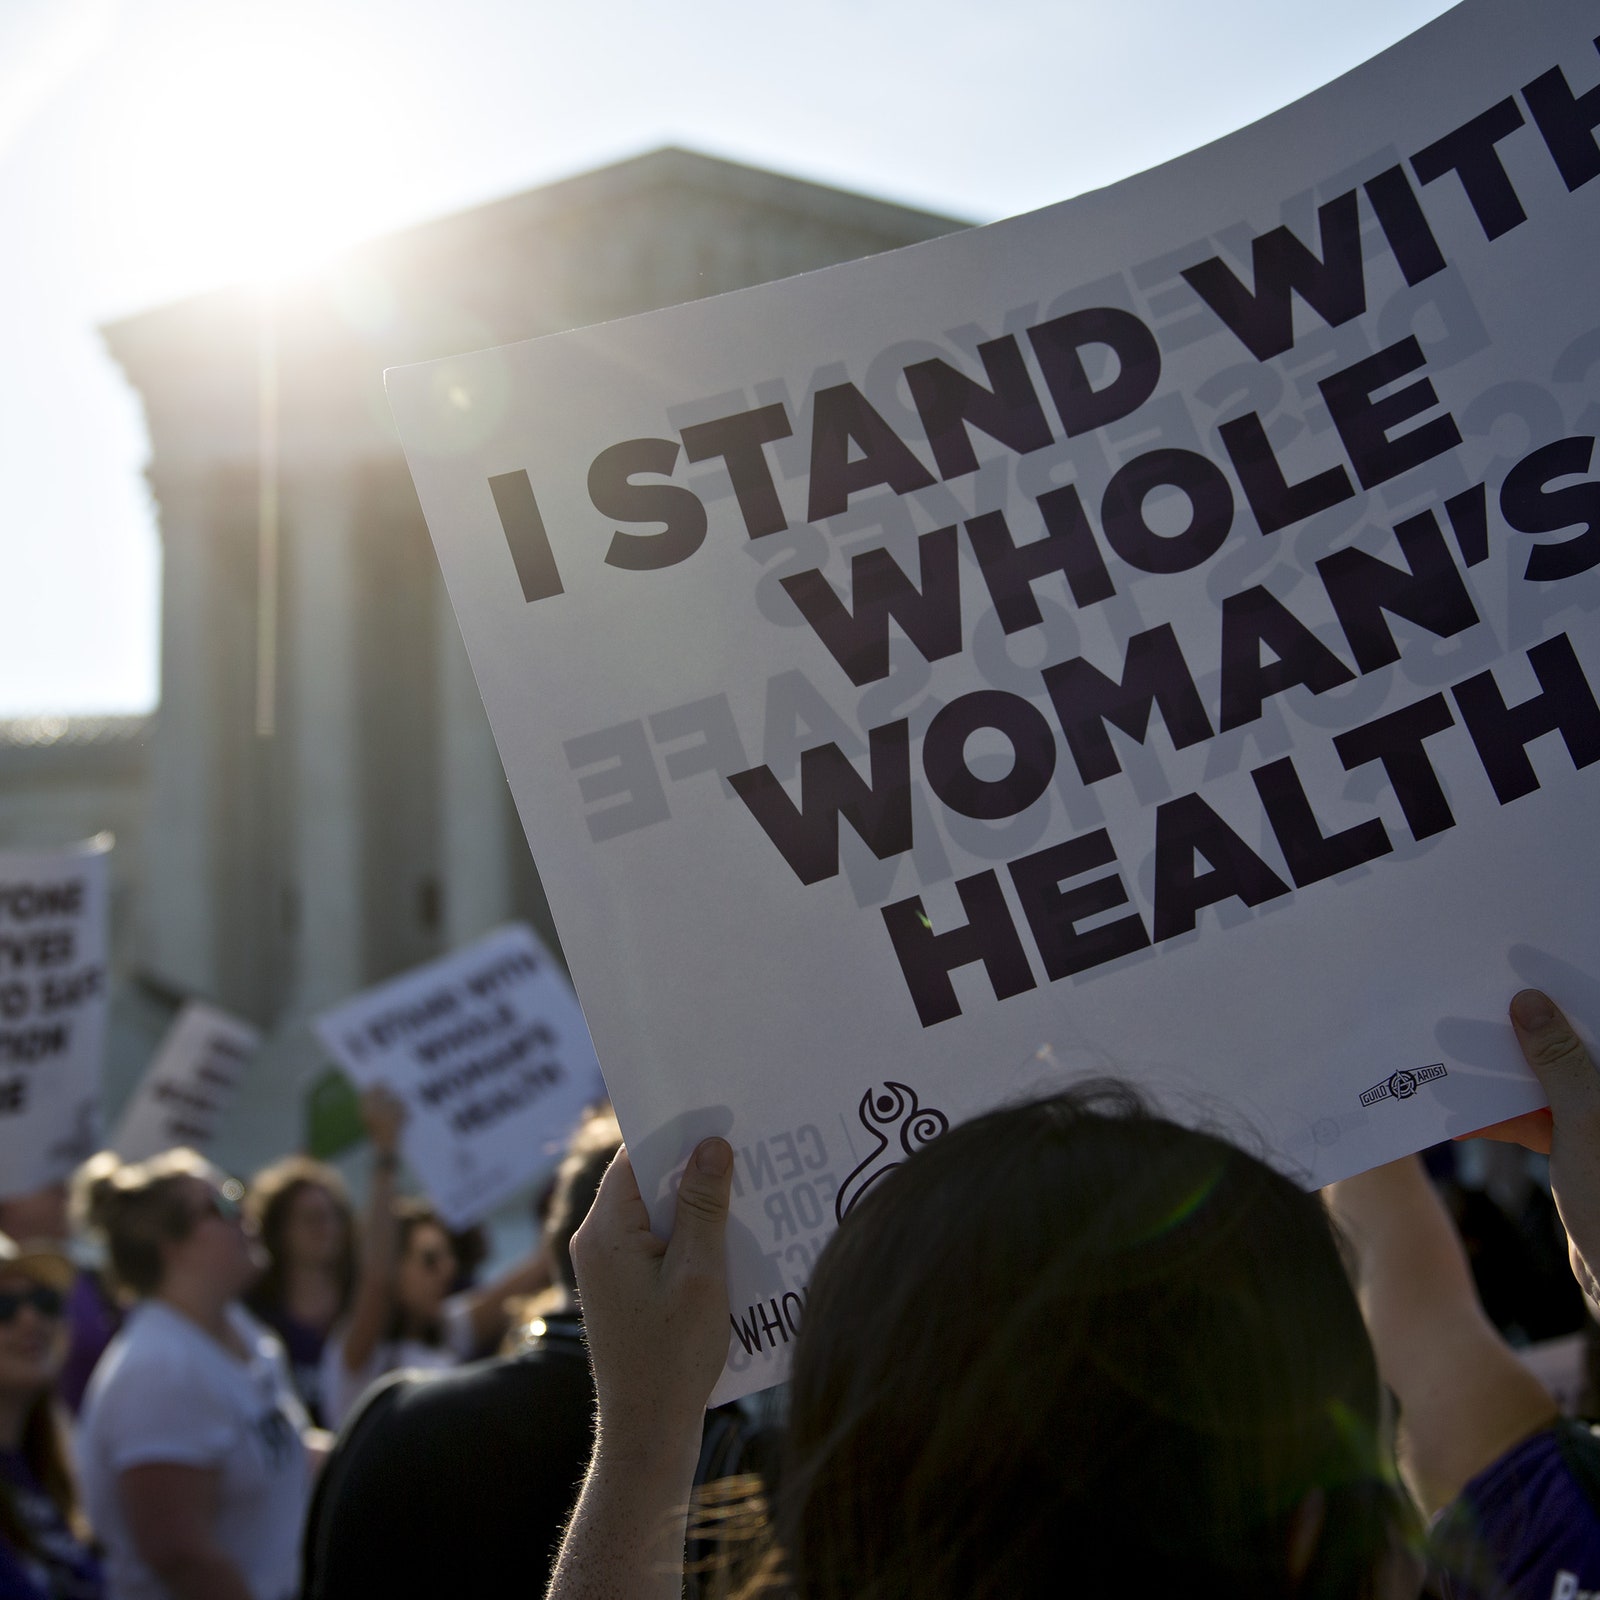 A Texas Woman Who Sued for an Abortion Will Leave the State to Obtain One